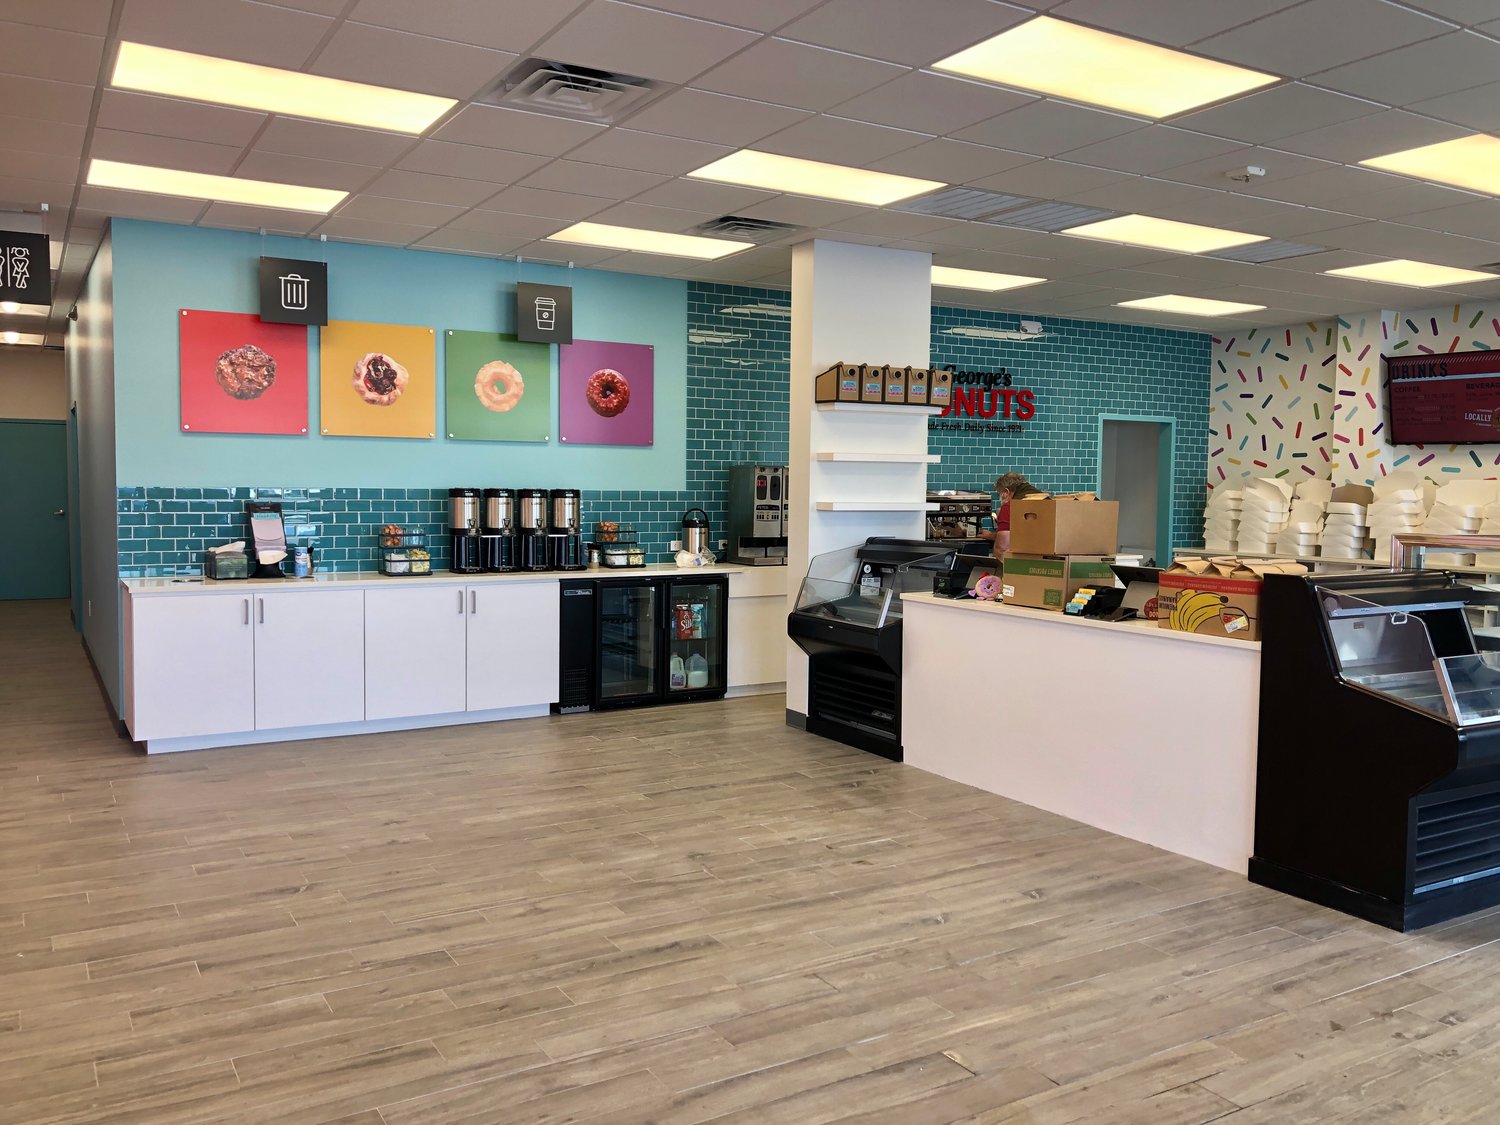 St. George’s Donuts now operates in 2,400 square feet on East Sunshine Street.